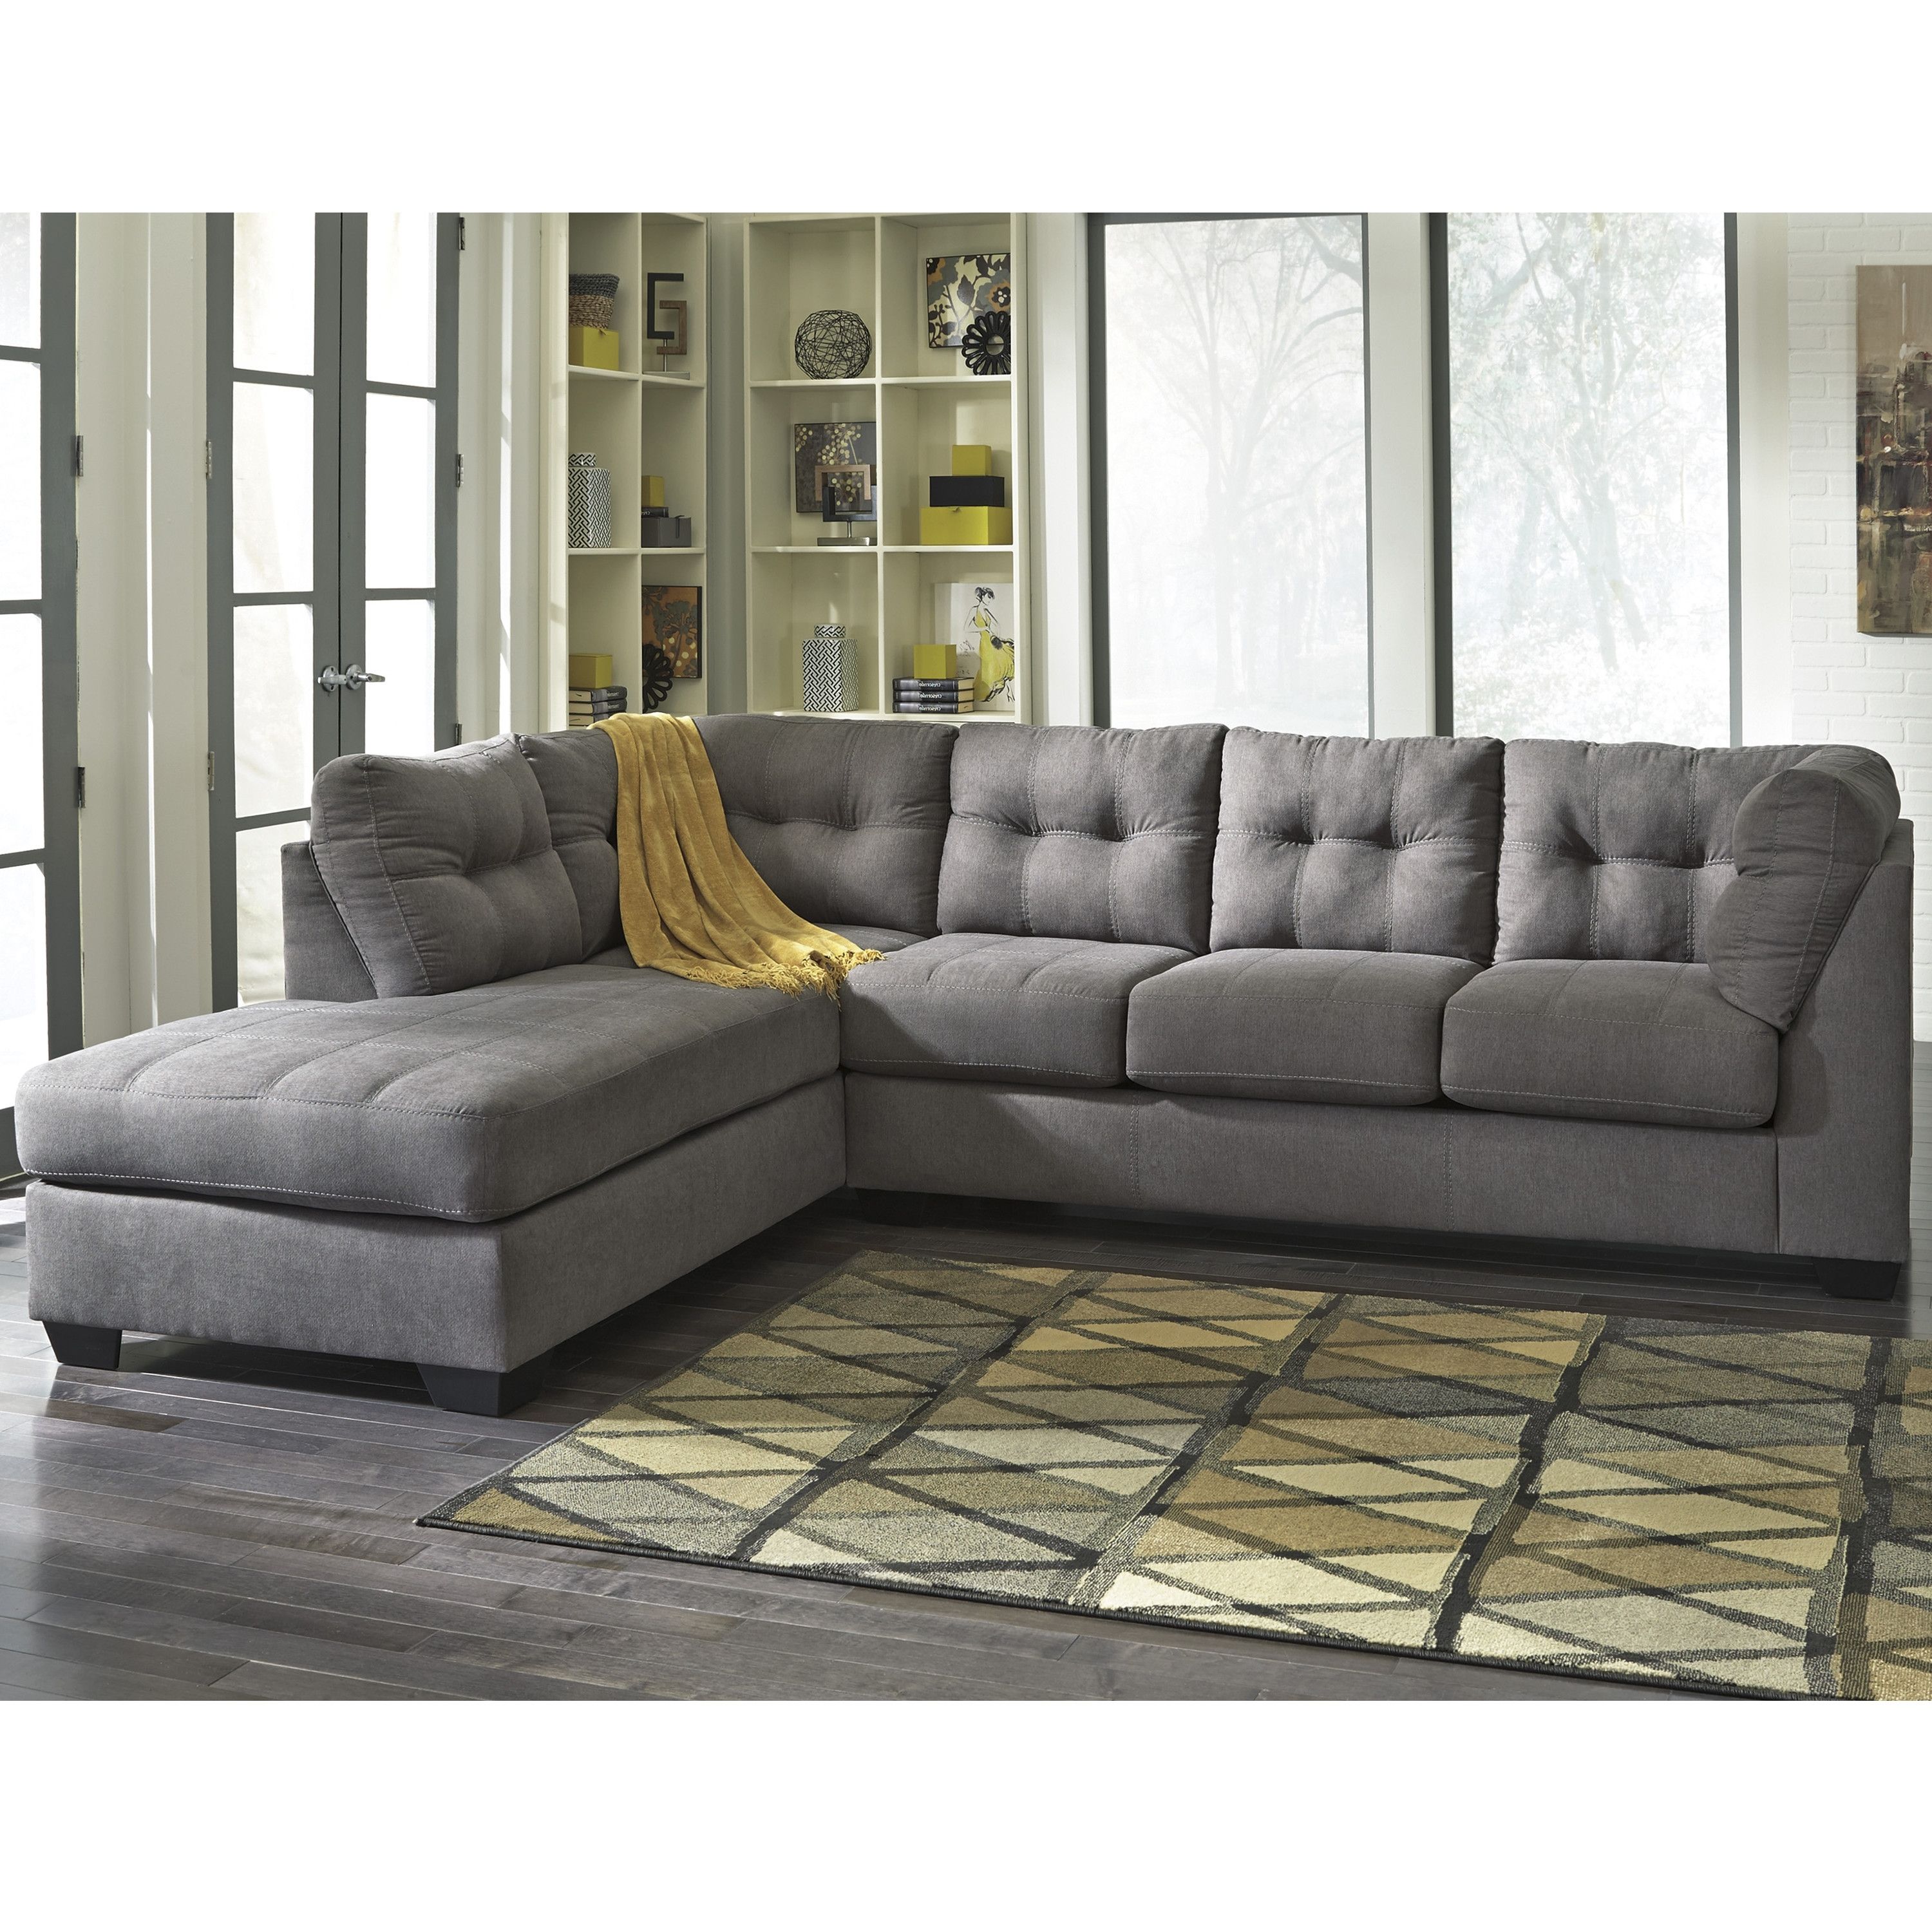 Luxury Sectional Sofas Portland 51 For Your Leather And Cloth Intended For Portland Sectional Sofas (Photo 4 of 10)